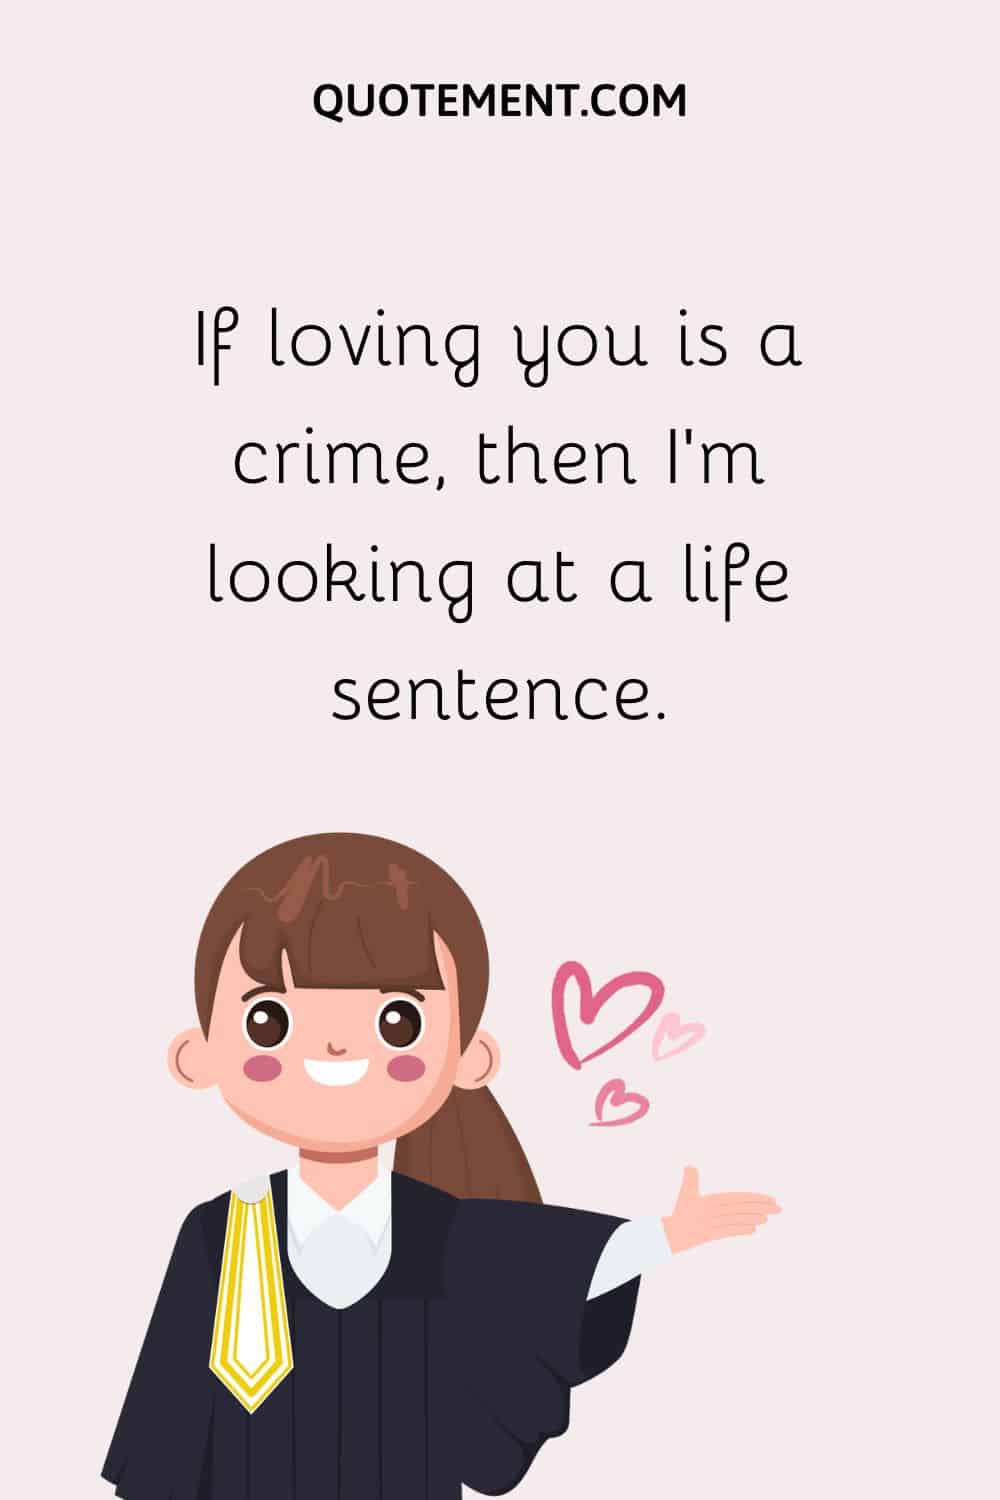 If loving you is a crime, then I’m looking at a life sentence